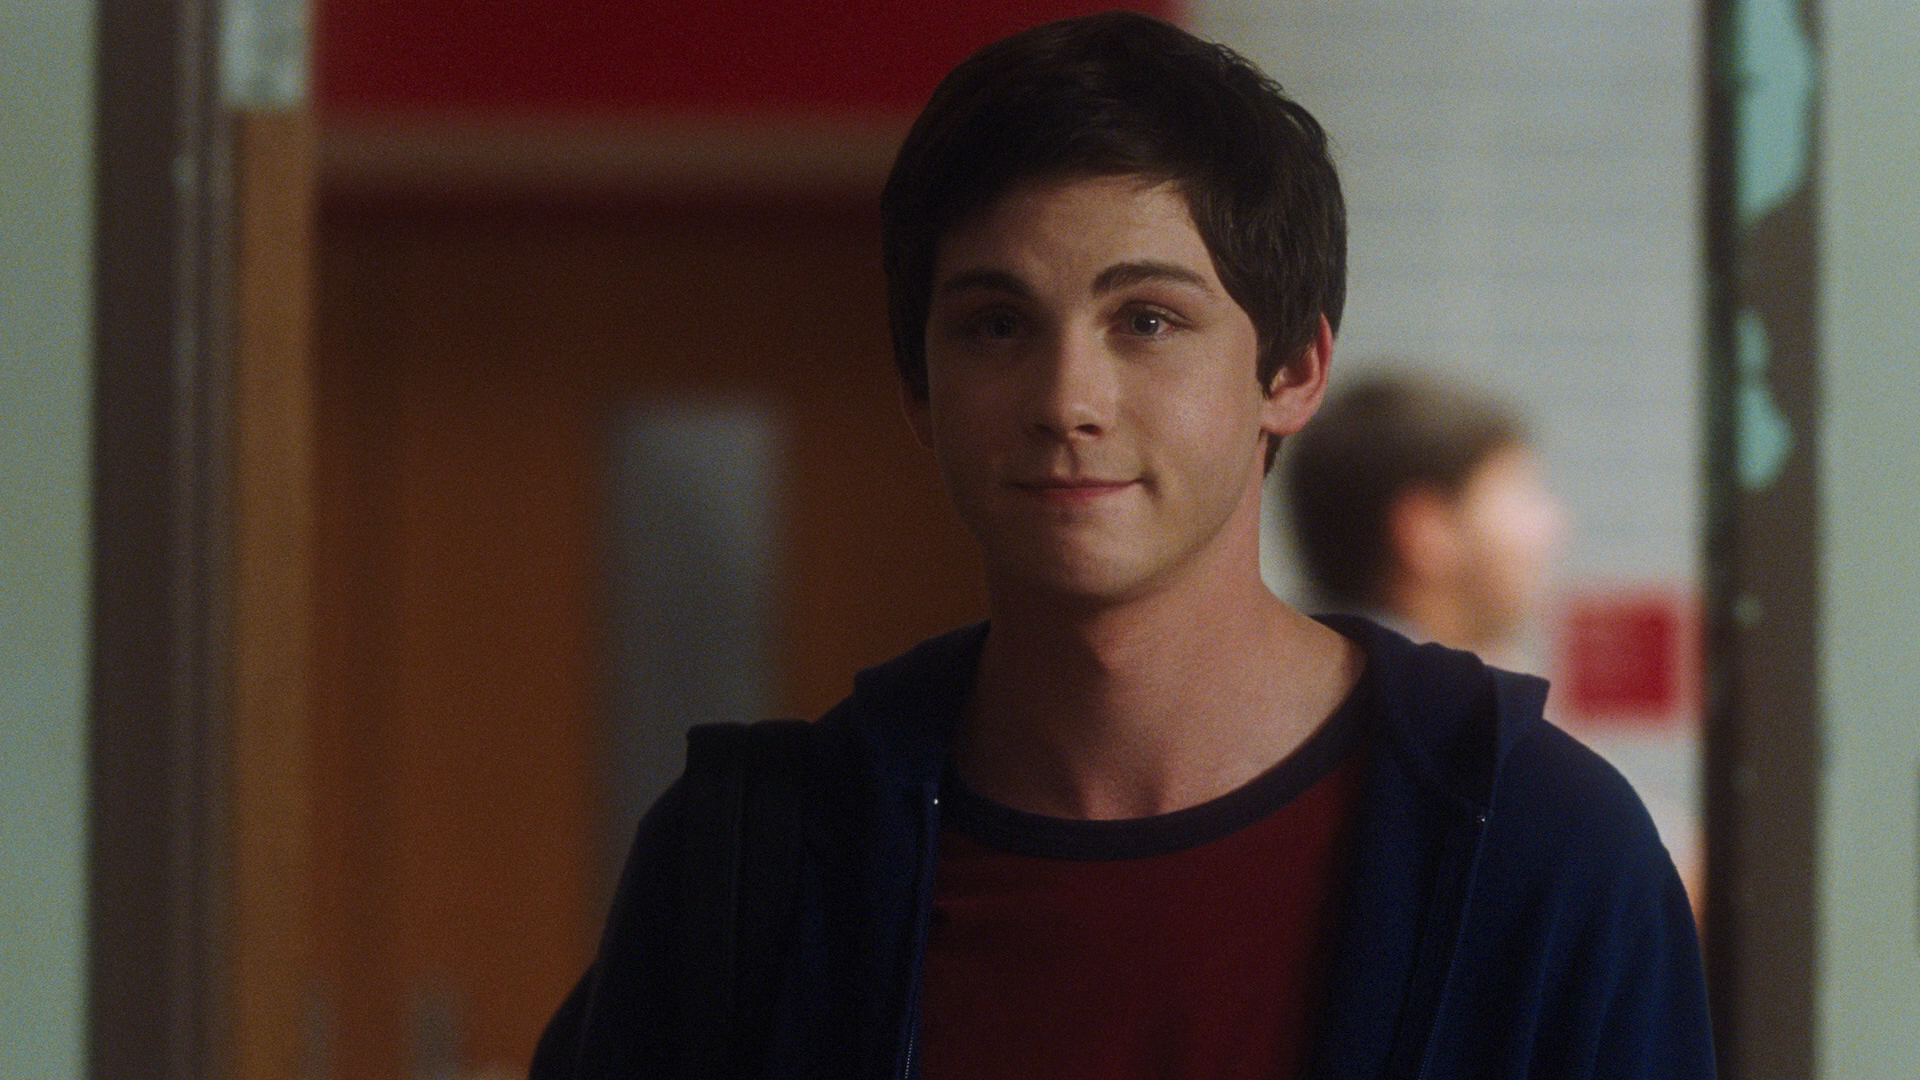 How “The Perks of Being a Wallflower” Helped Me Understand Mental Illness